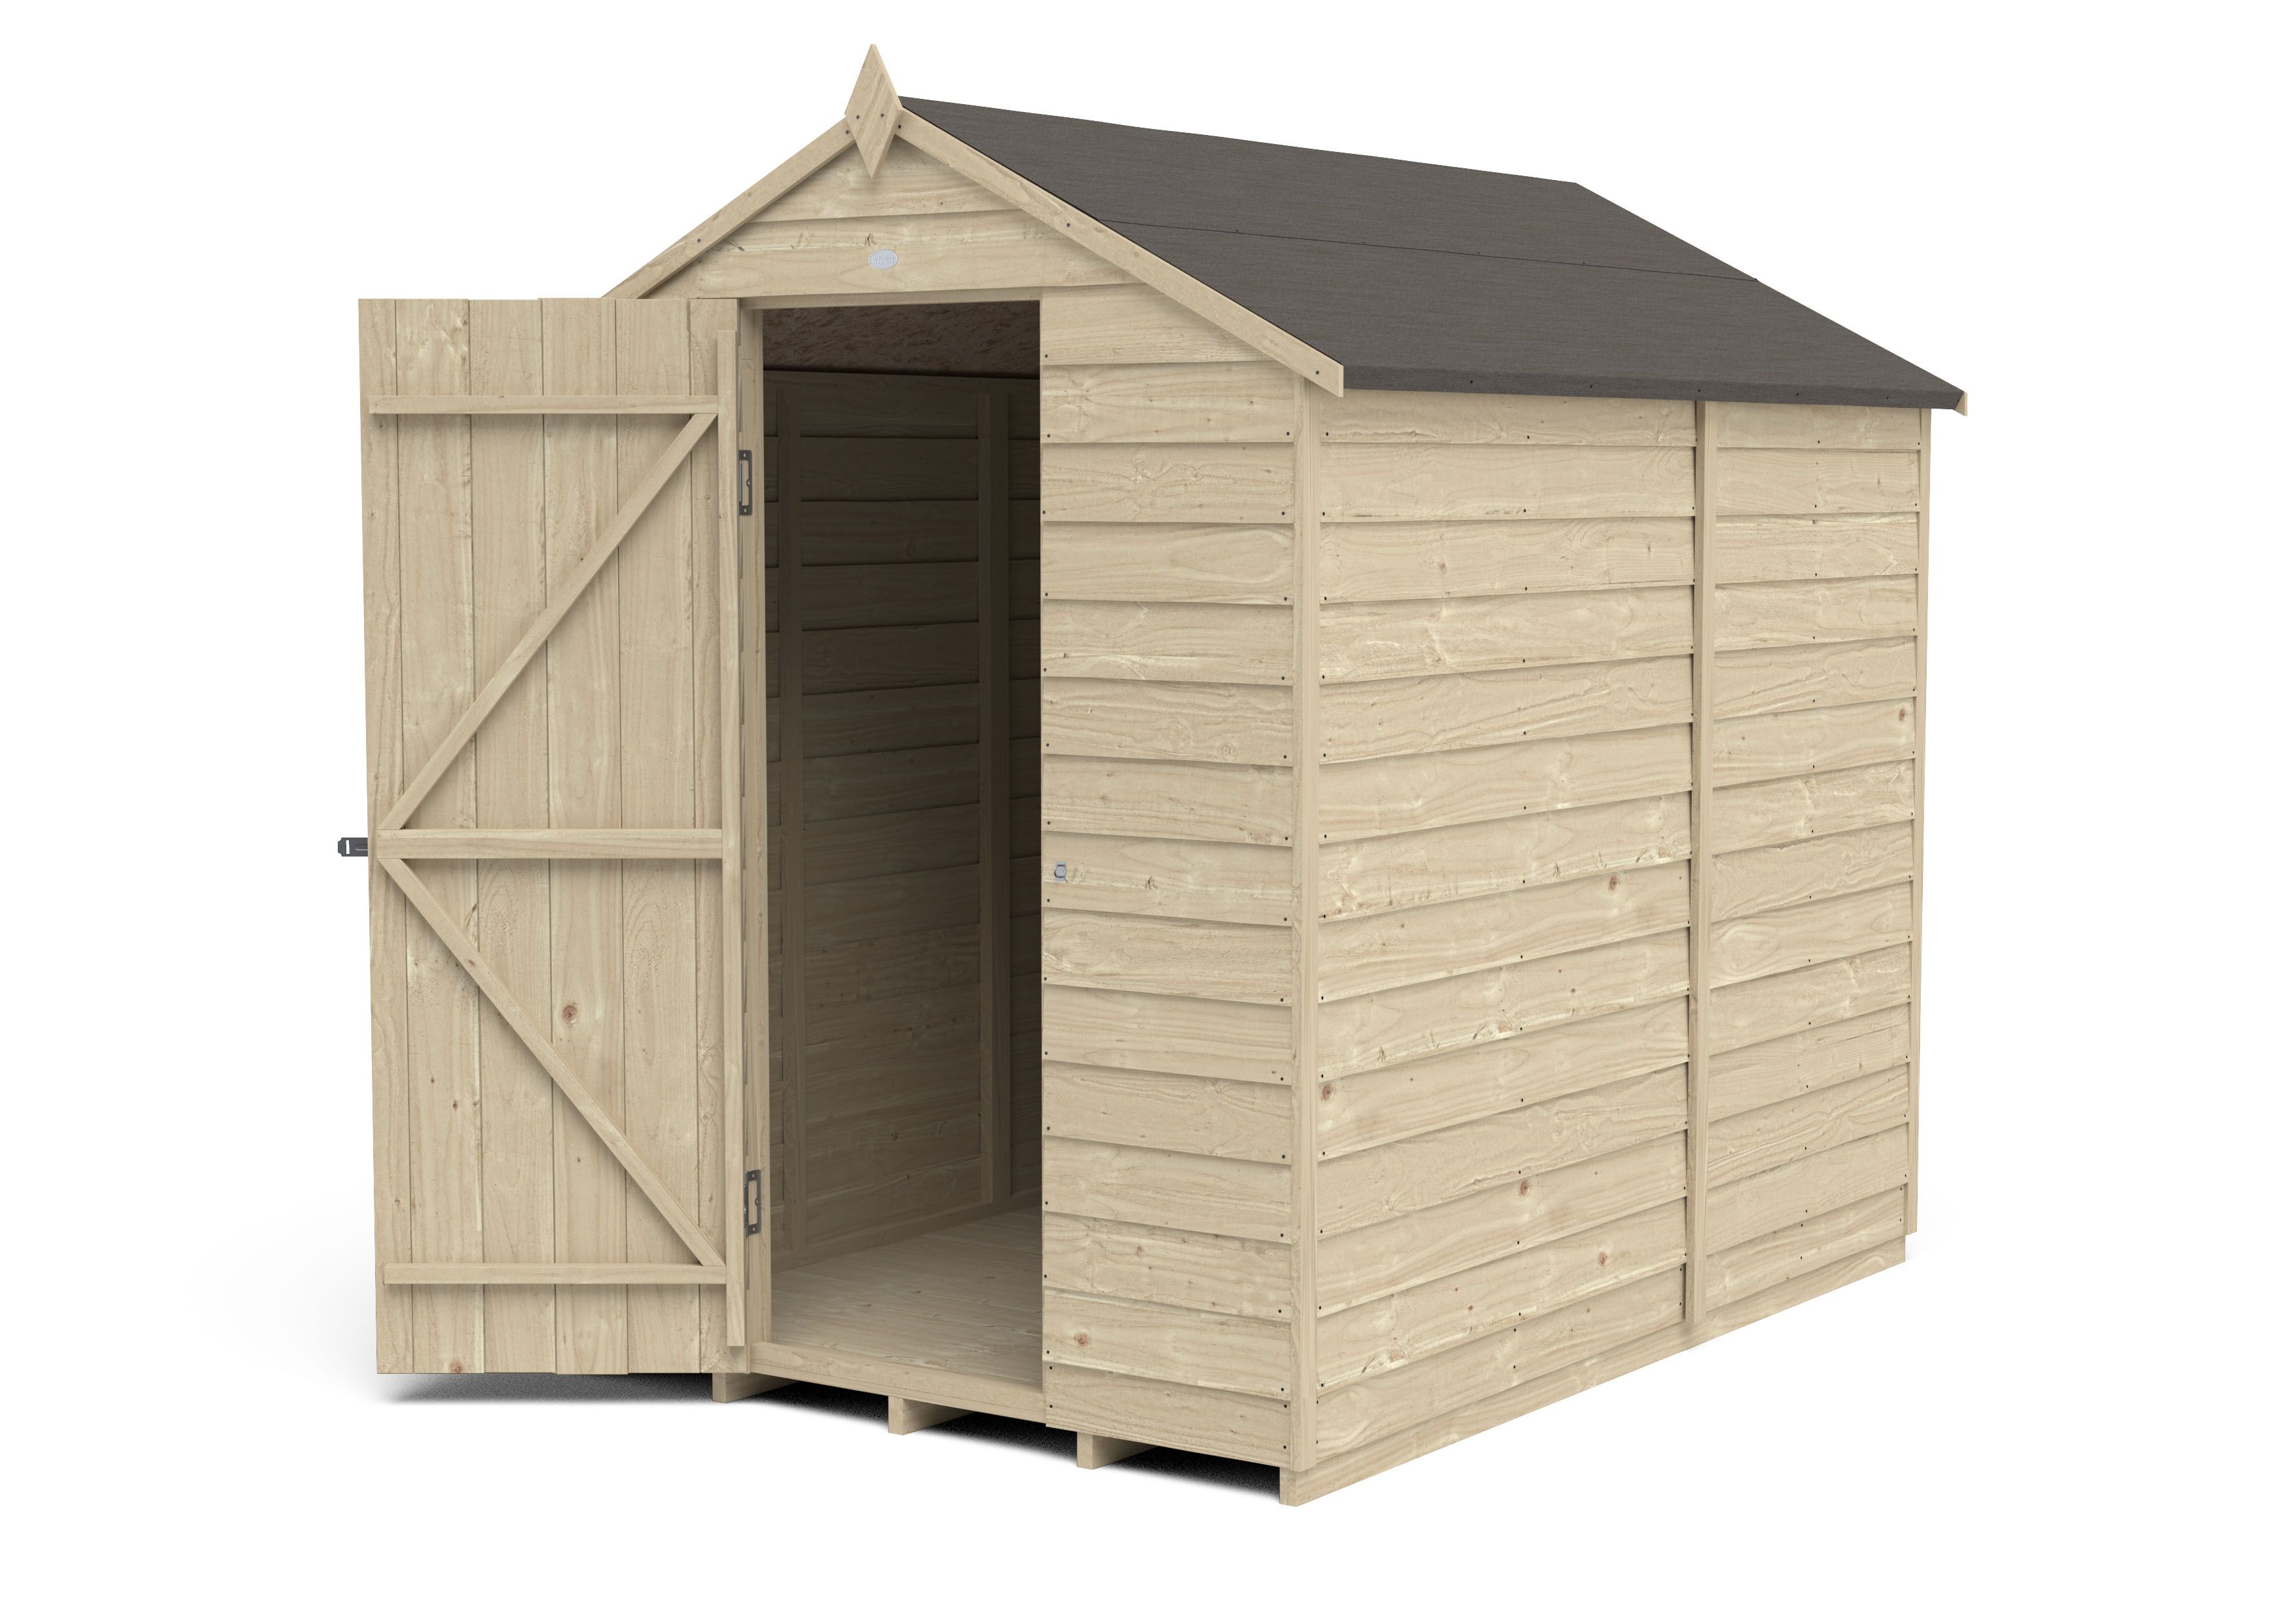 Forest Garden Overlap 7x5 ft Apex Wooden Pressure treated Shed with floor (Base included) - Assembly service included